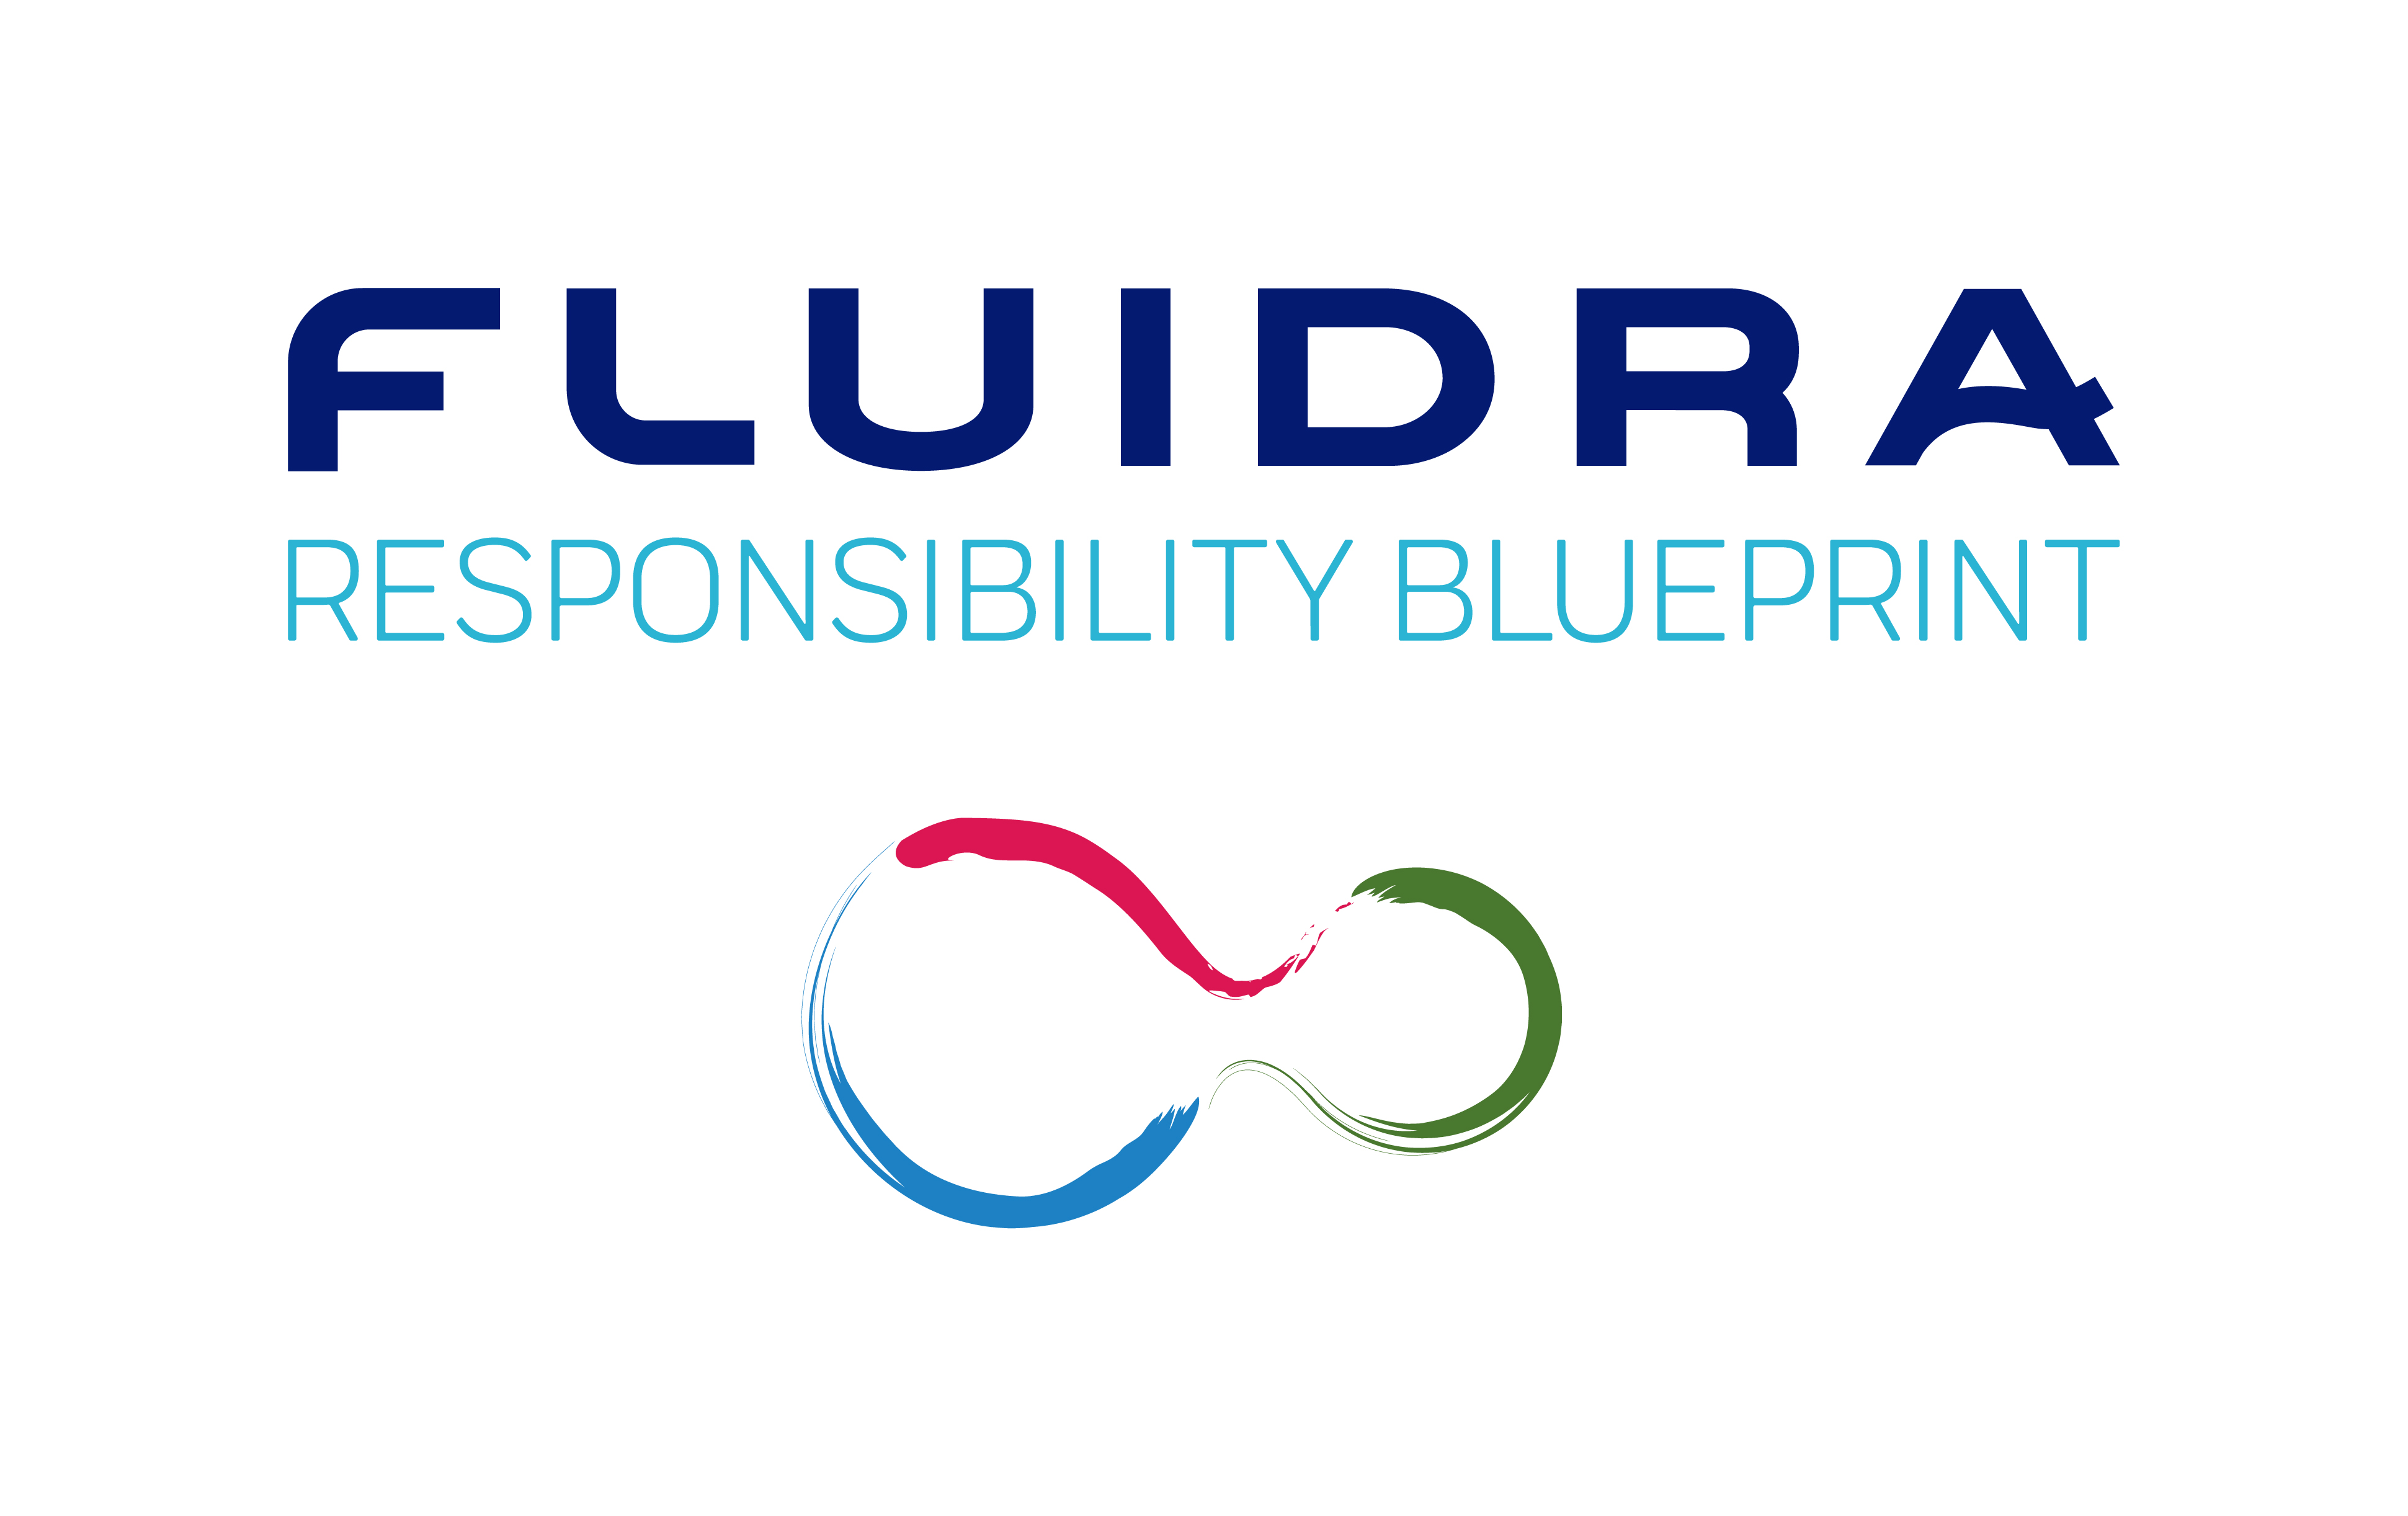 Fluidra continues to enhance its ESG performance as corroborated by the Sustainalytics rating